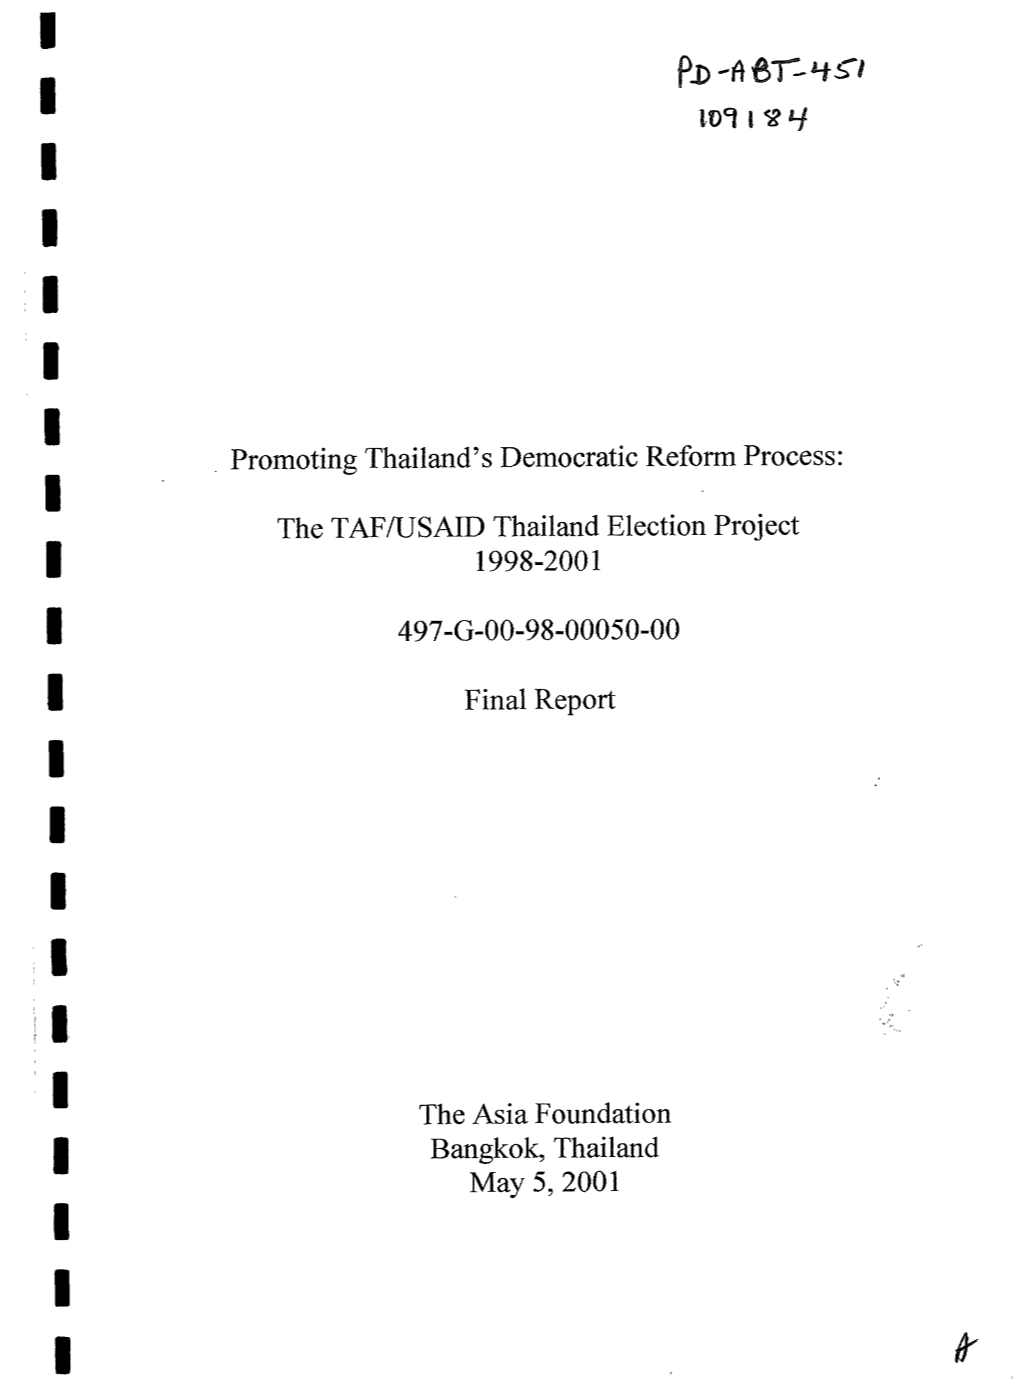 The TAFRJSAID Thailand Election Project 1998-200 1 Final